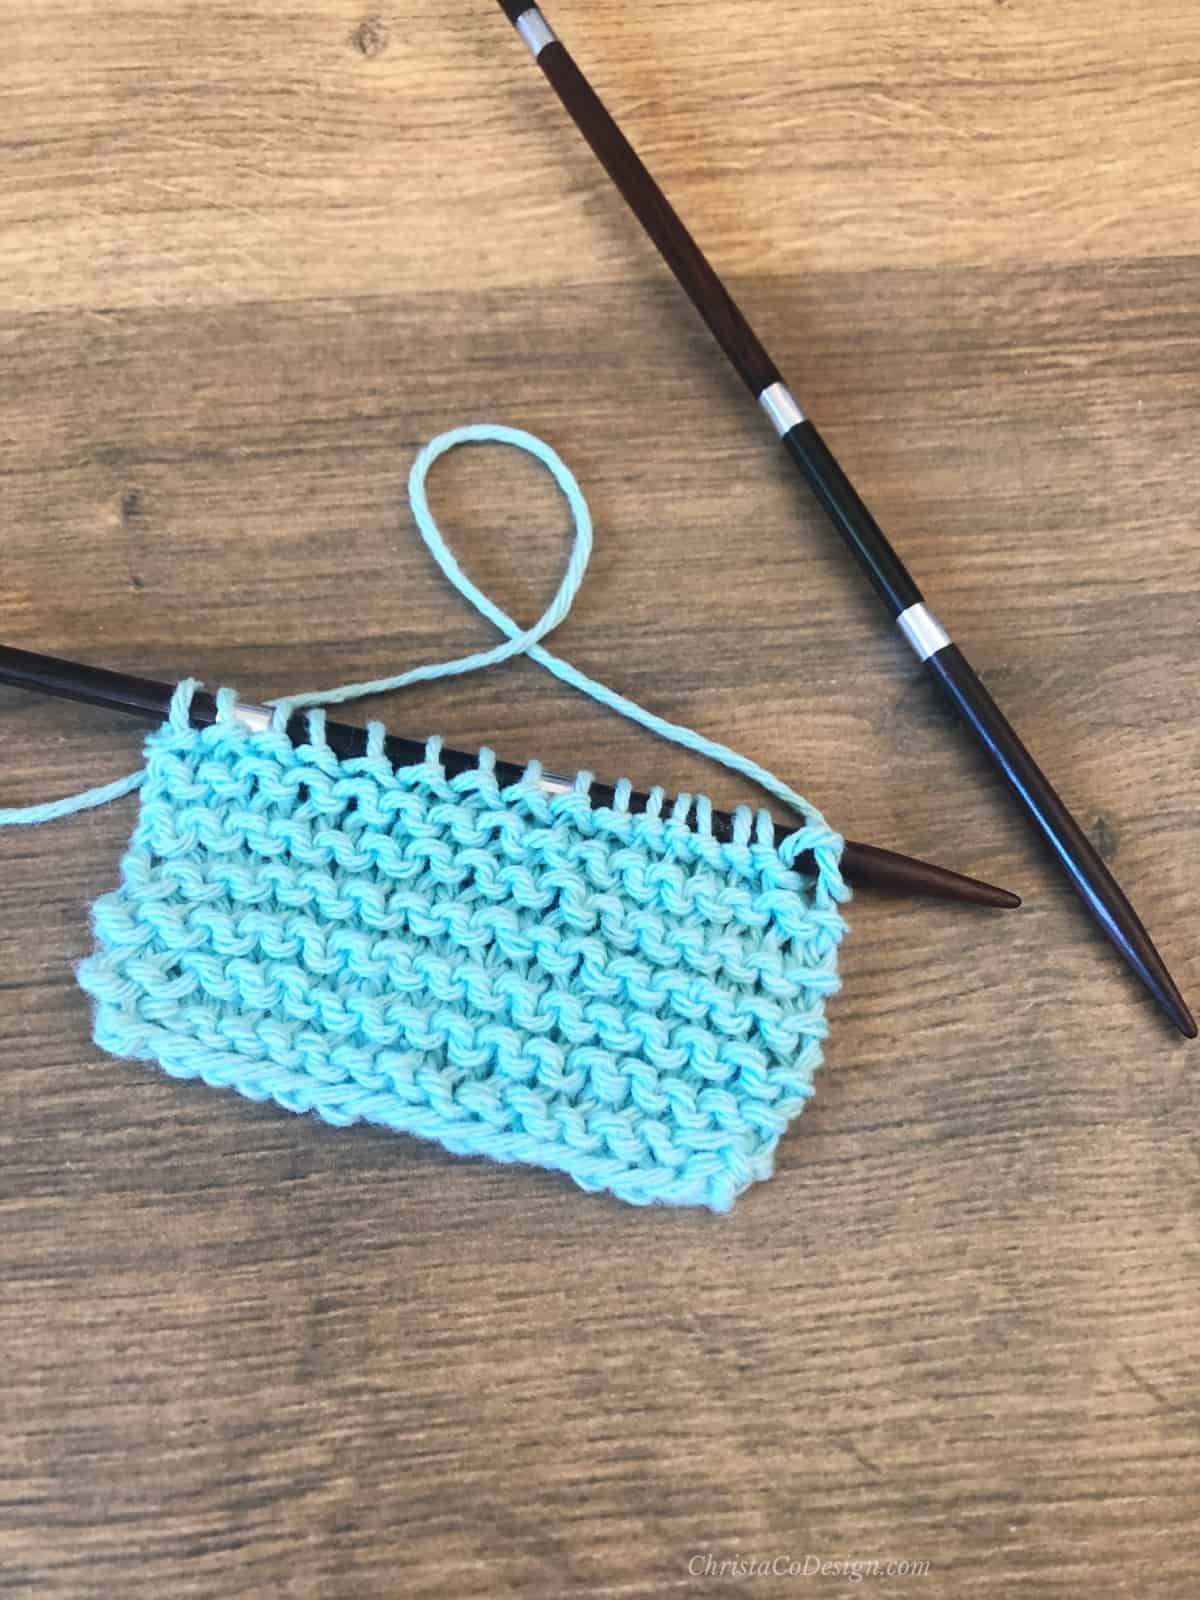 Rows of garter stitch in blue yarn on straight needle.